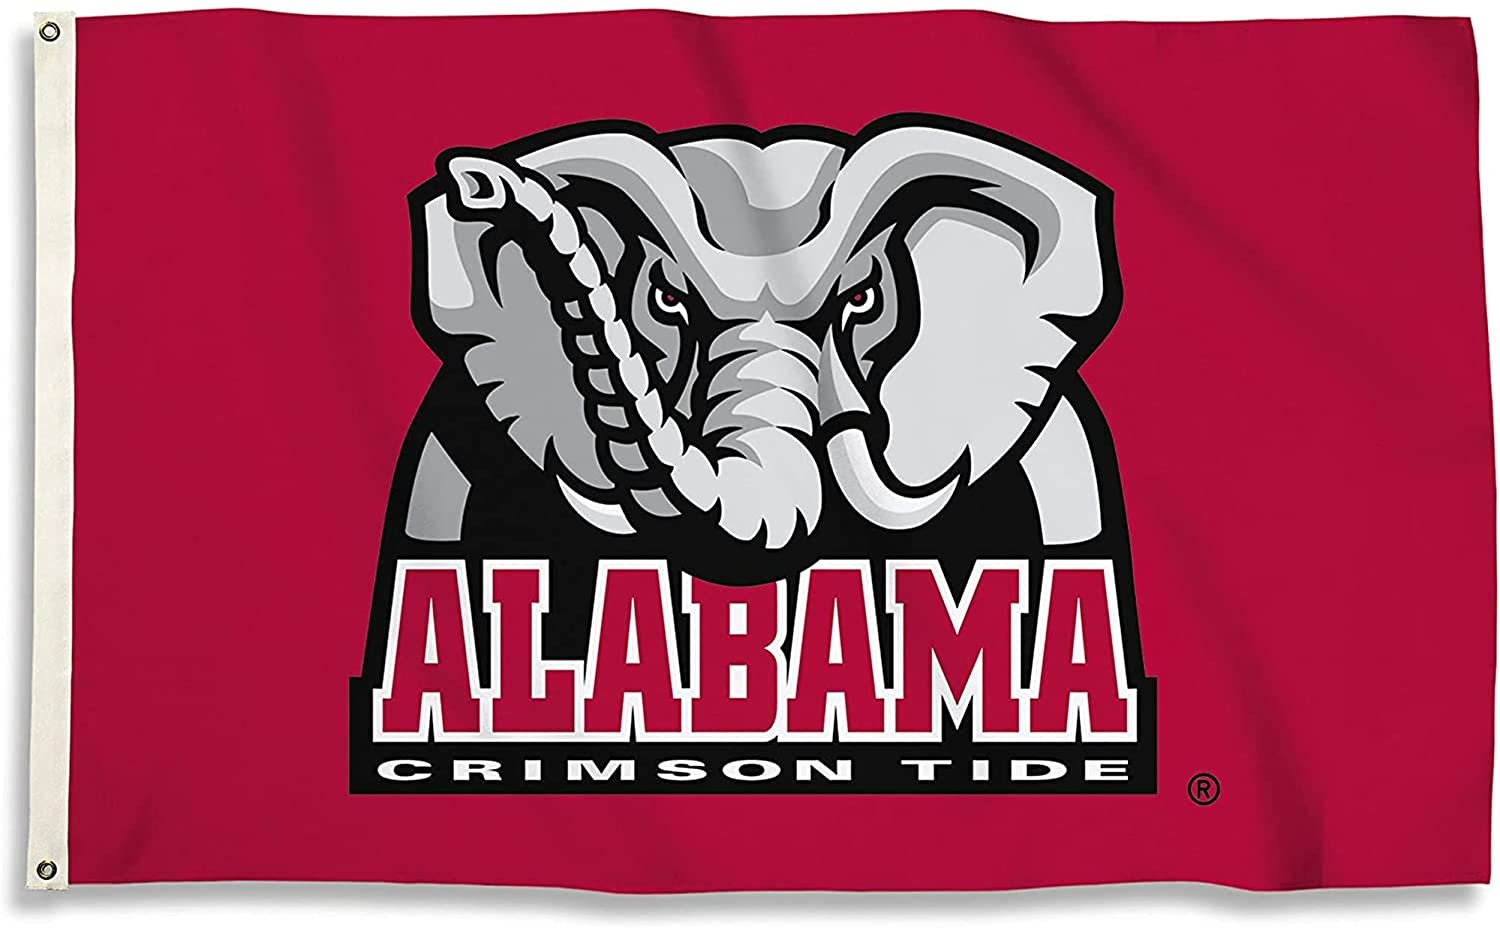 Alabama Crimson Tide 3-Foot by 5-Foot Single Sided Banner Flag with Grommets University of